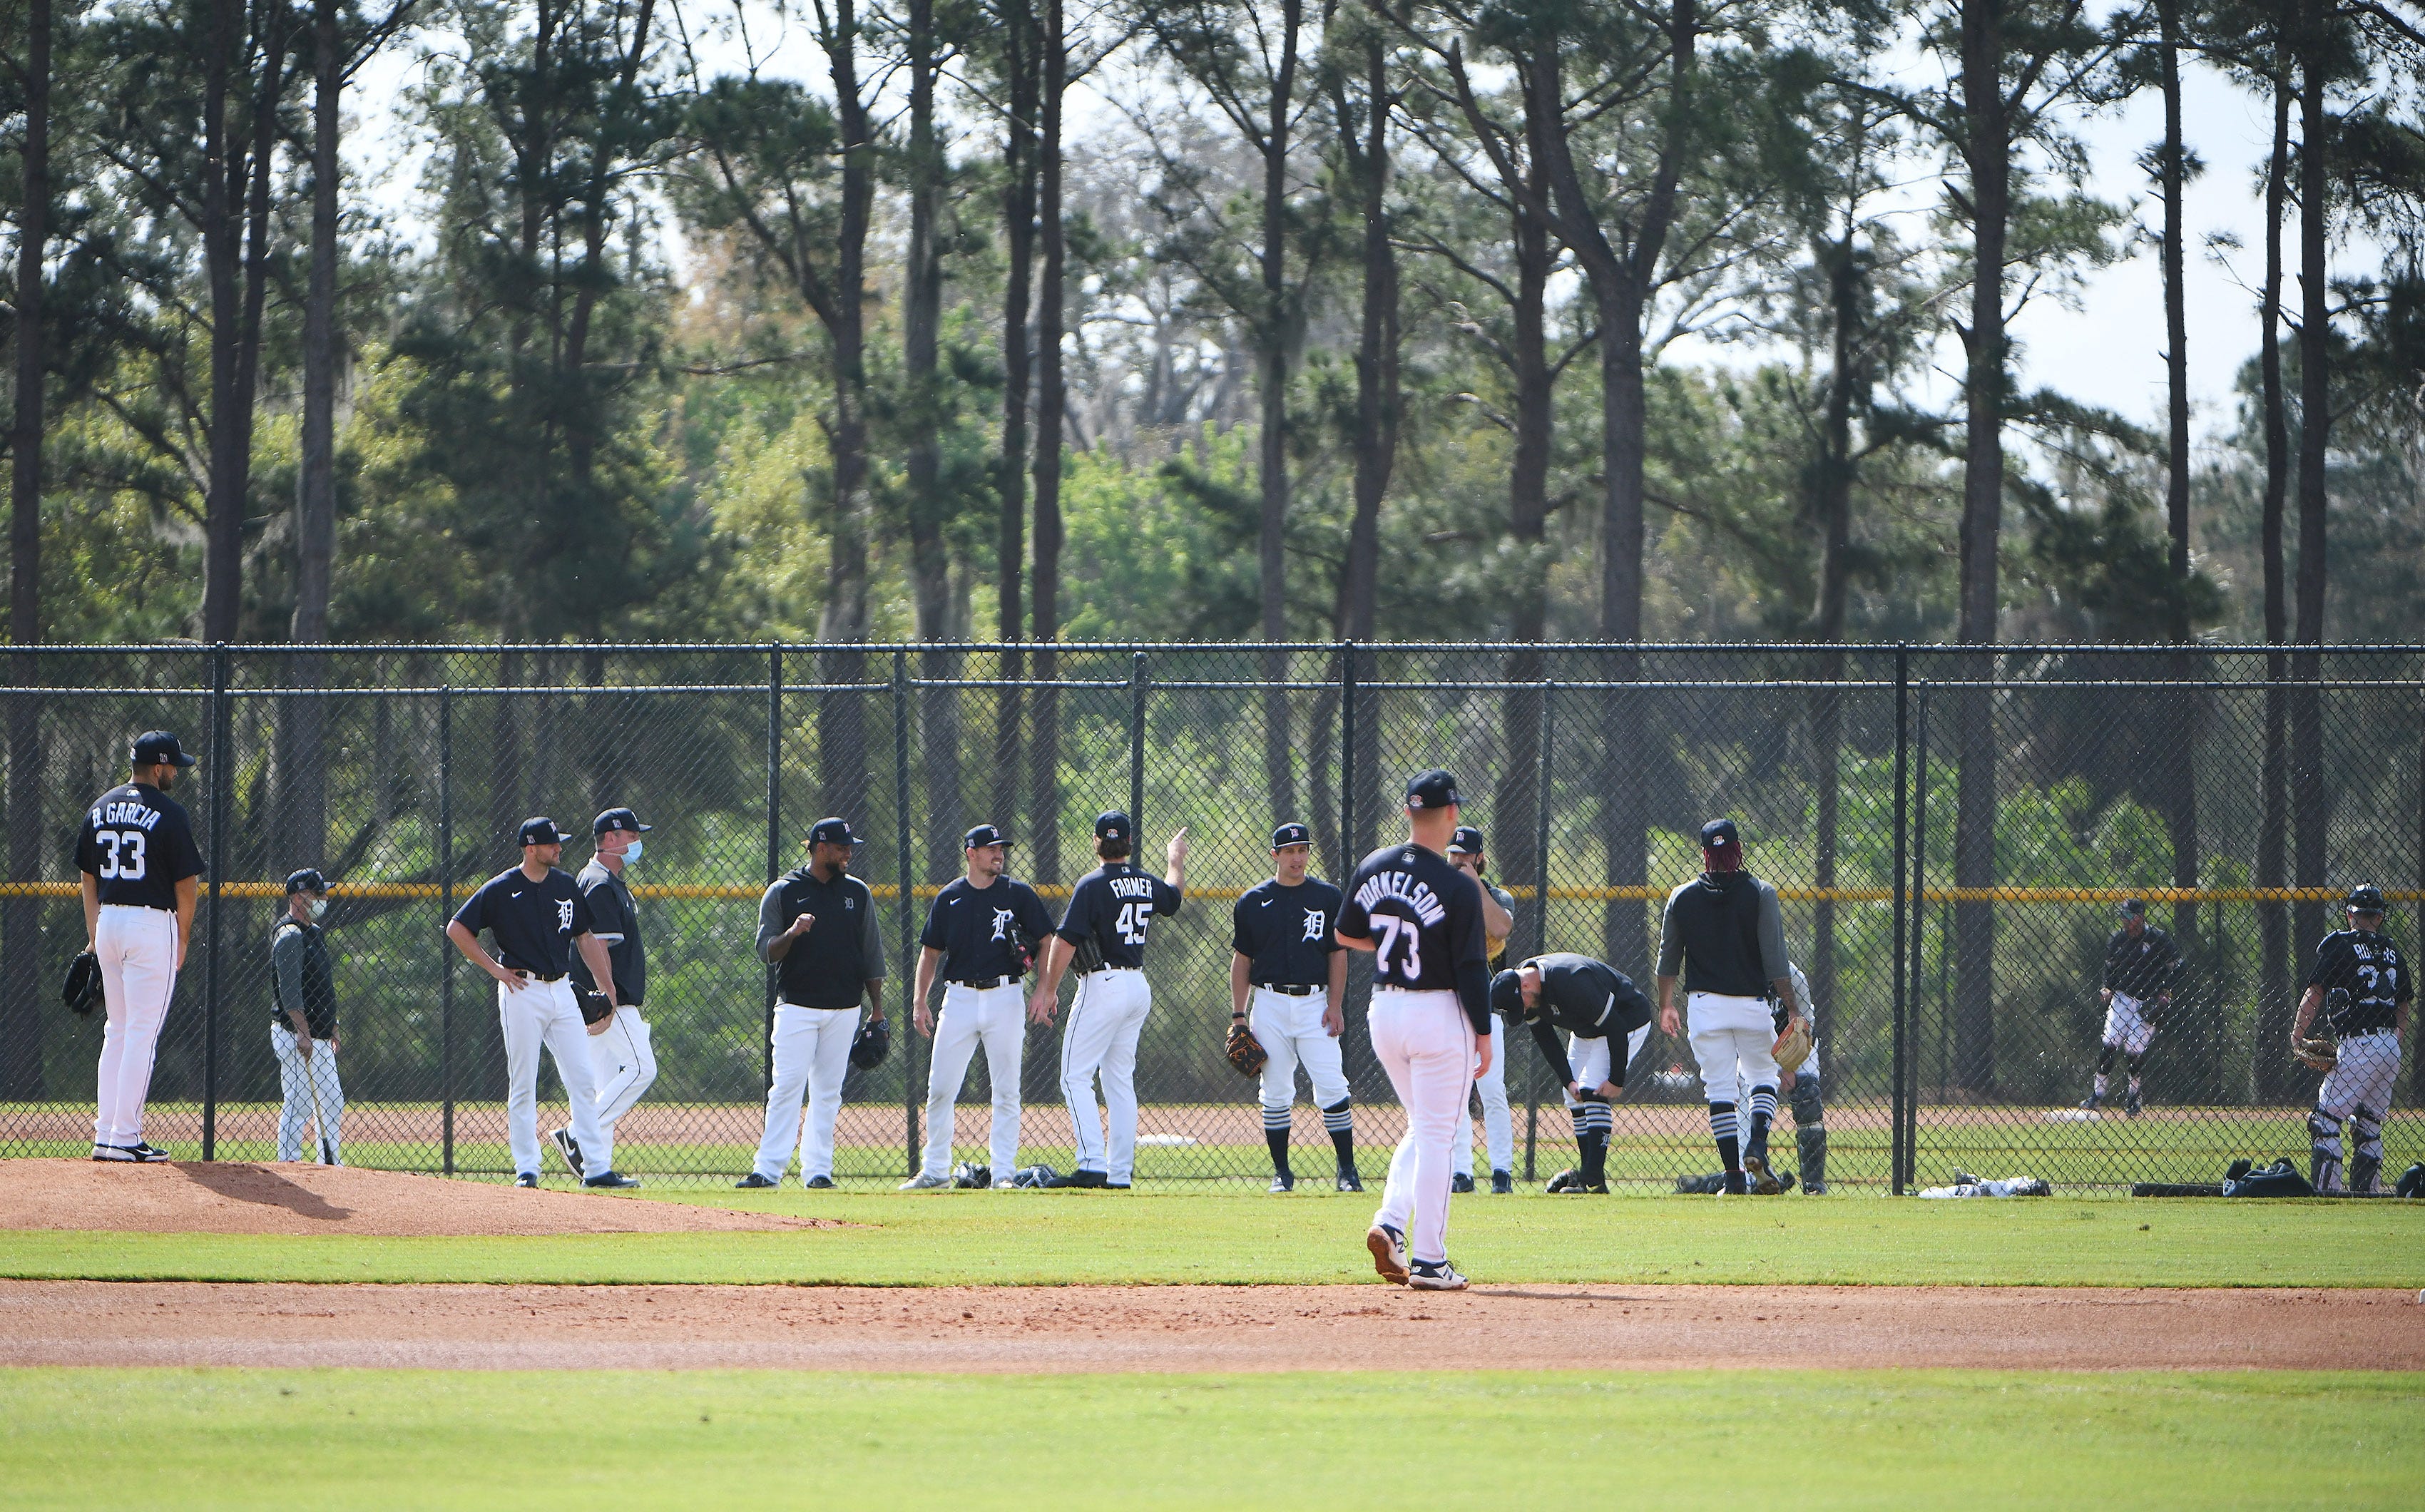 Tigers pitchers Bryan Garcia (33) is seen on the mound during infield practice.